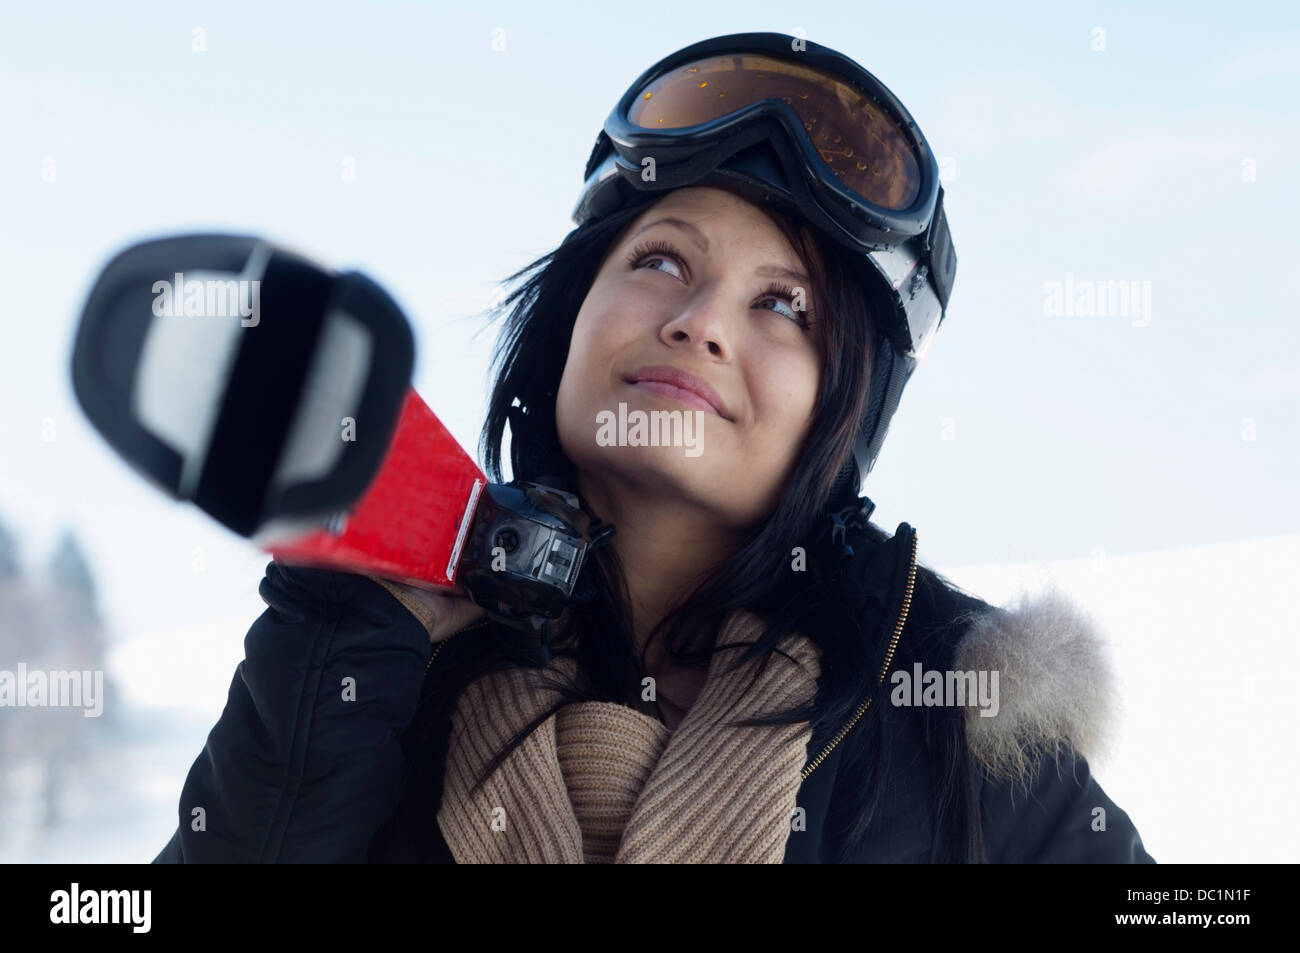 Young female wearing ski goggles and carrying skis Stock Photo